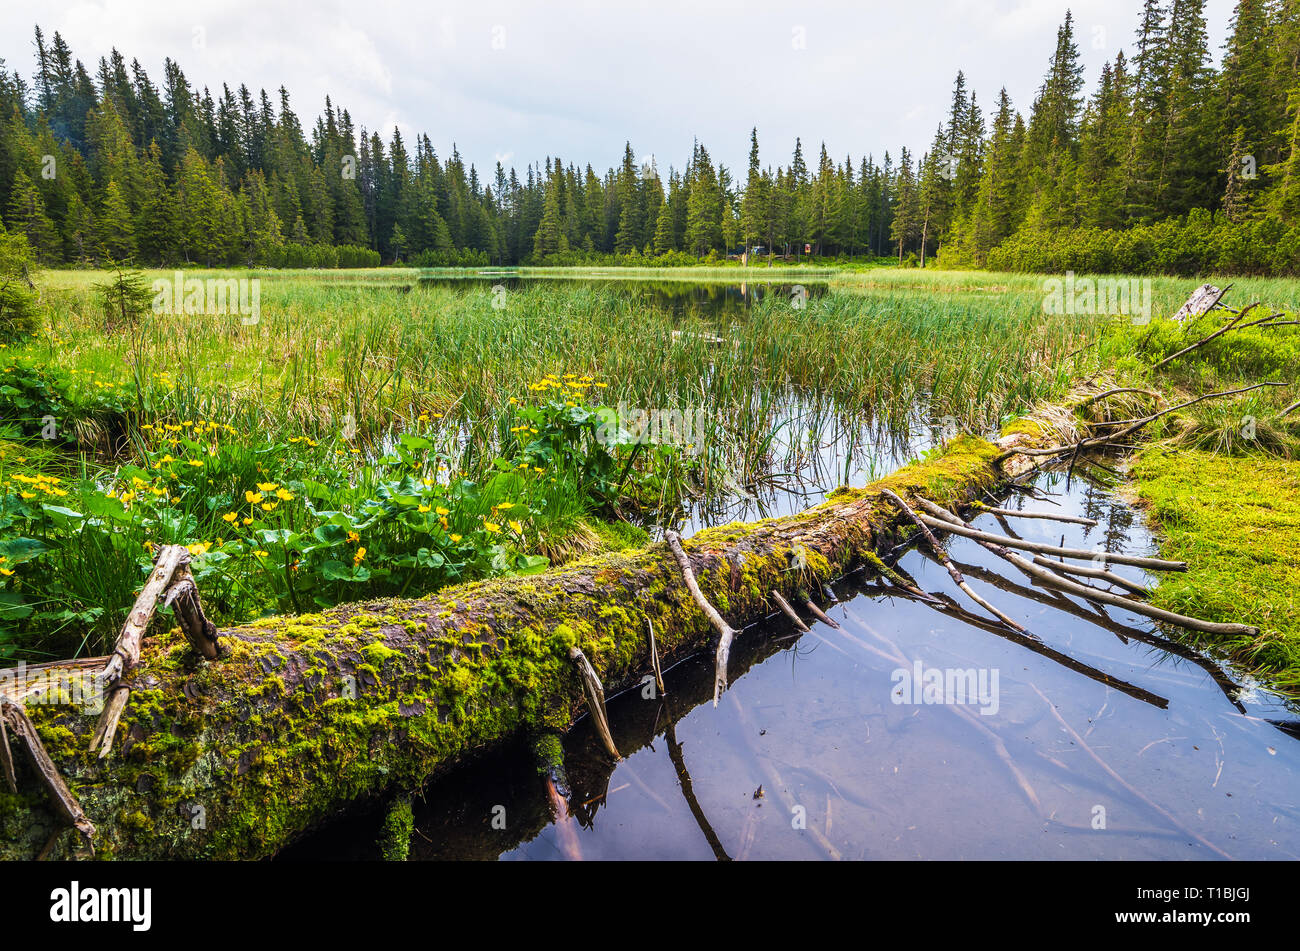 Lake in the spruce forest. Summer landscape a cloudy day. The old rotten tree in the water. Wild nature. Mountains Carpathians, Ukraine, Europe. Touri Stock Photo